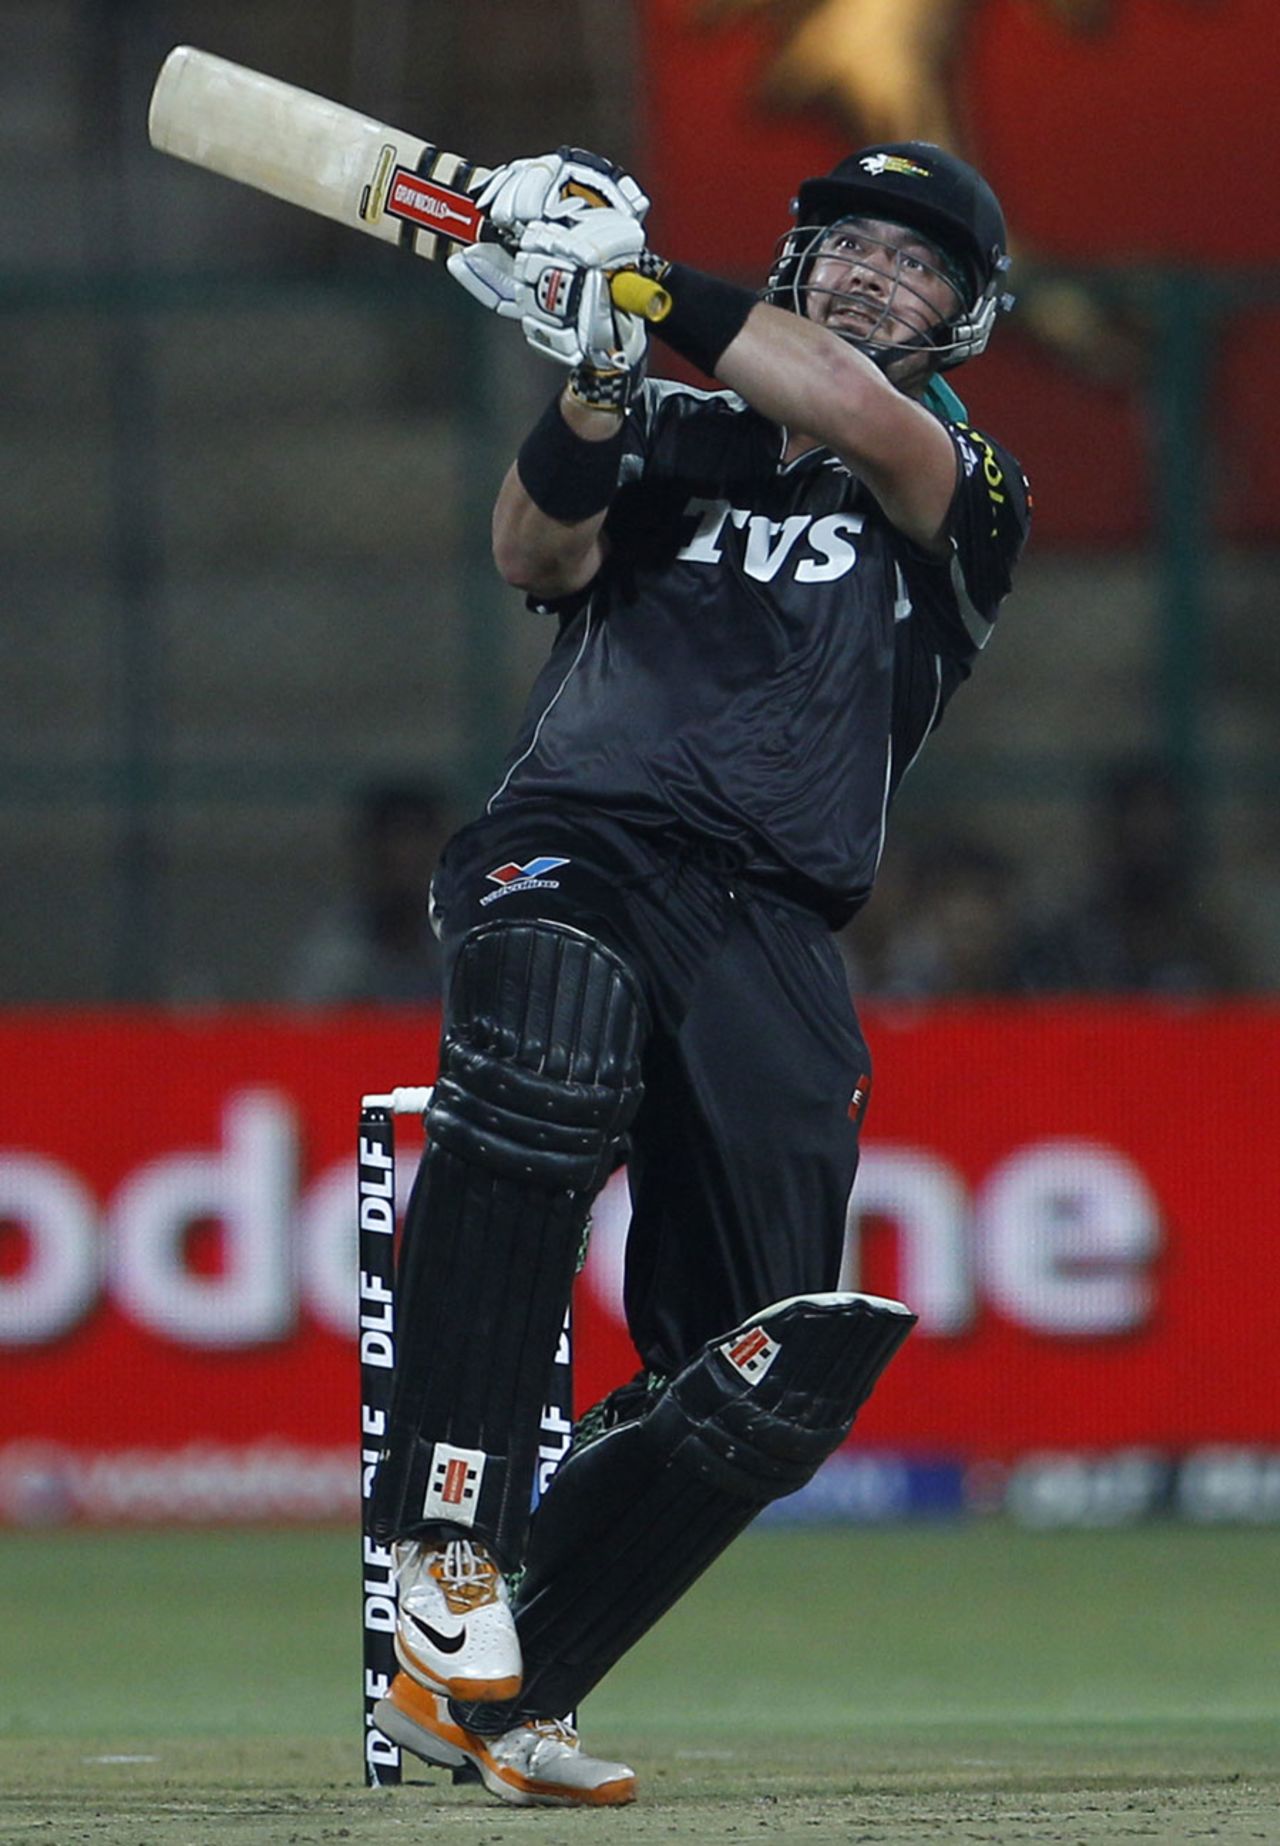 Jesse Ryder pulls in front of the wicket, Royal Challengers Bangalore v Pune Warriors, IPL 2011, Bangalore, April 29, 2011